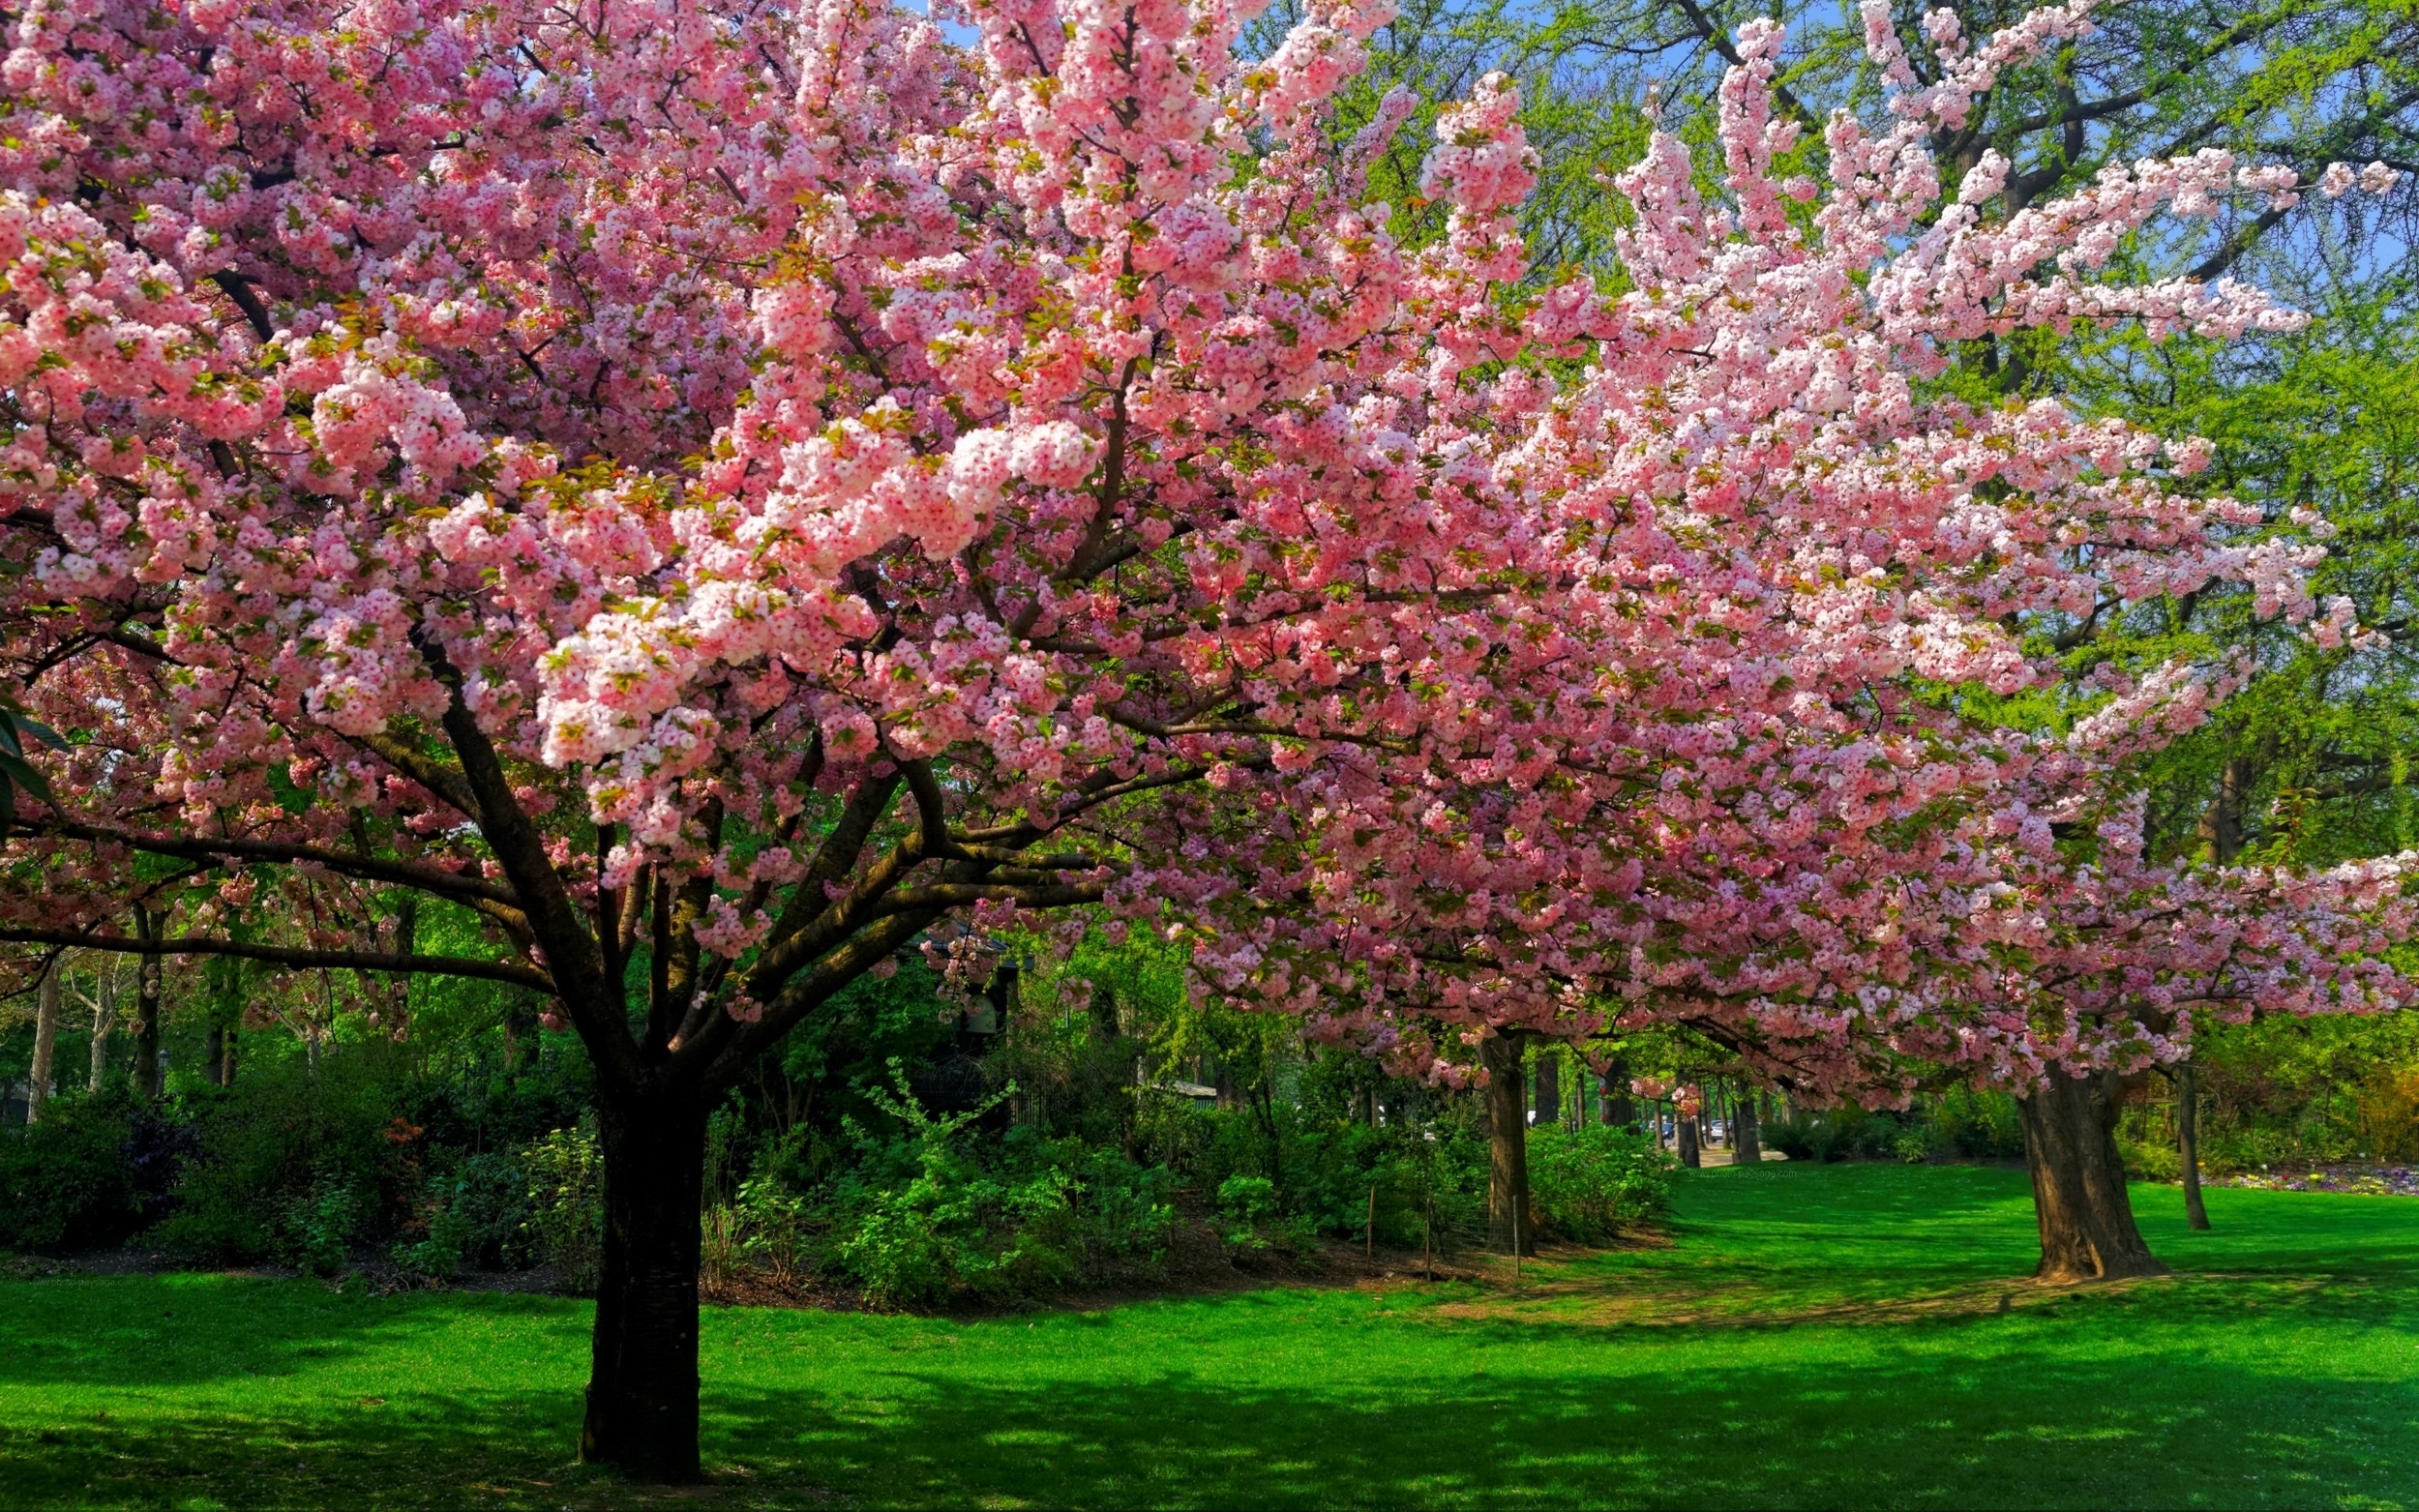 Landscape Nature Cherry Blossom Trees Lawns Park Flowers Spring Pink Green 2500x1563